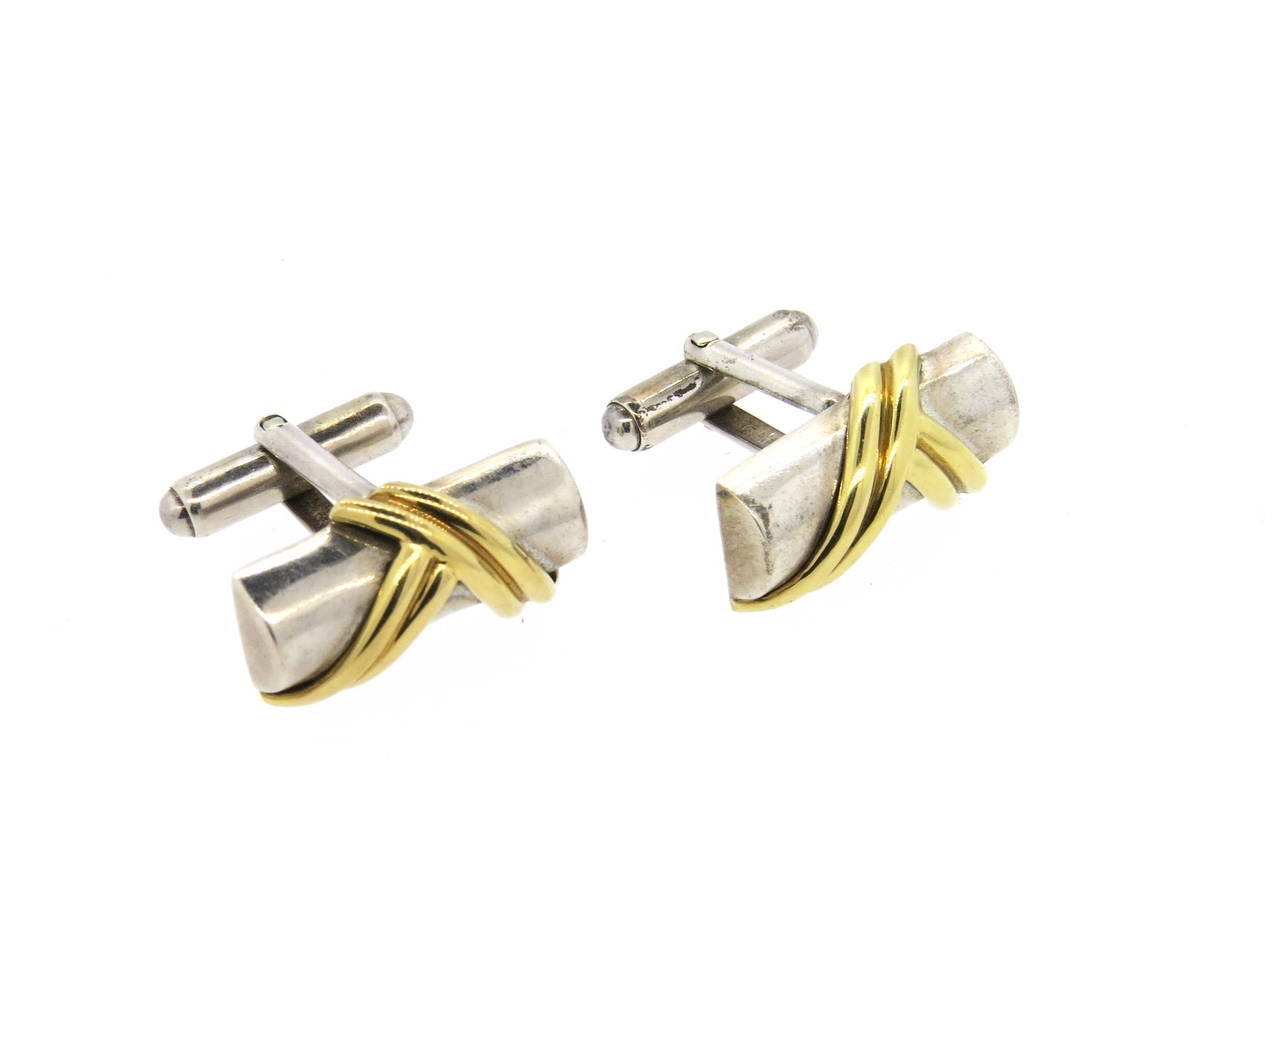 Pair of sterling silver and 18k gold cufflinks, crafted by Tiffany & Co. Cufflink top measures 22mm x 13mm. Marked 925,750 and Tiffany & Co. Weight - 15.5 grams